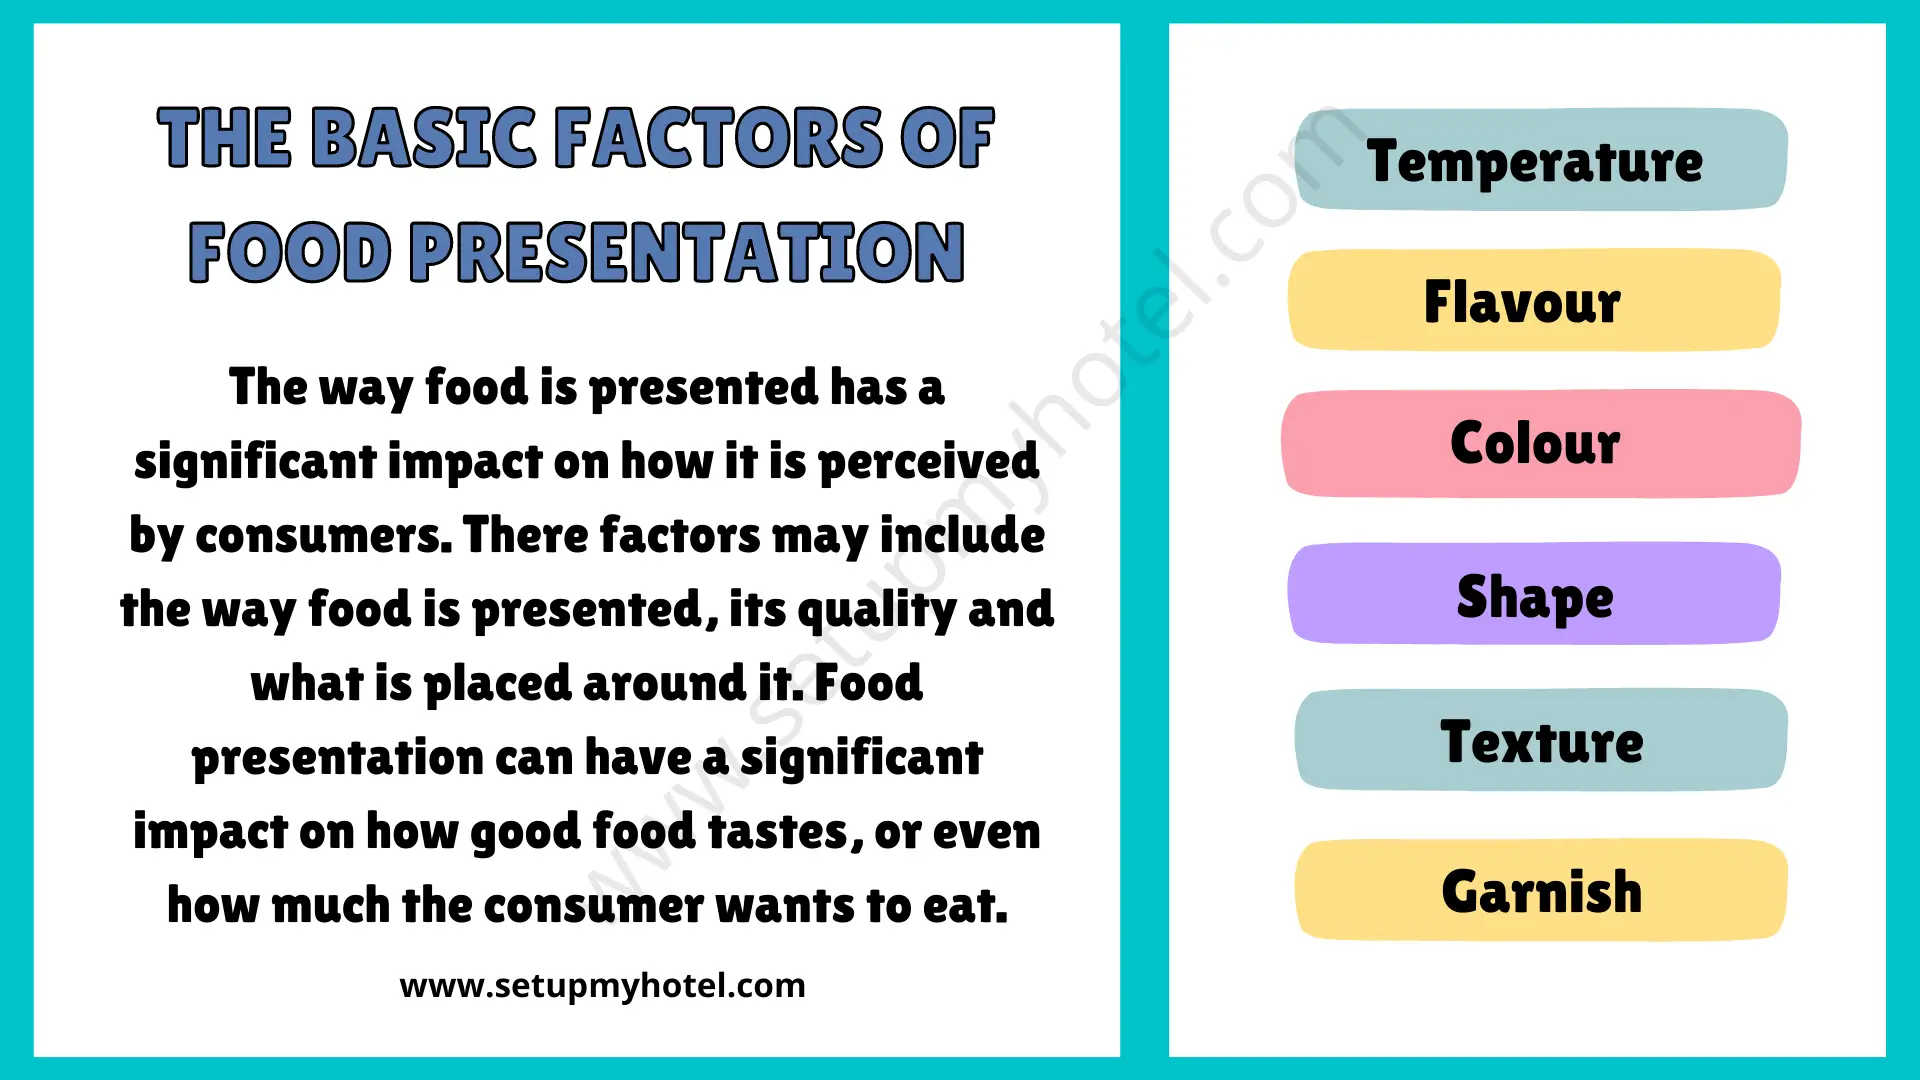  The Basic Factors Of Food Presentation - Hospitality Industry